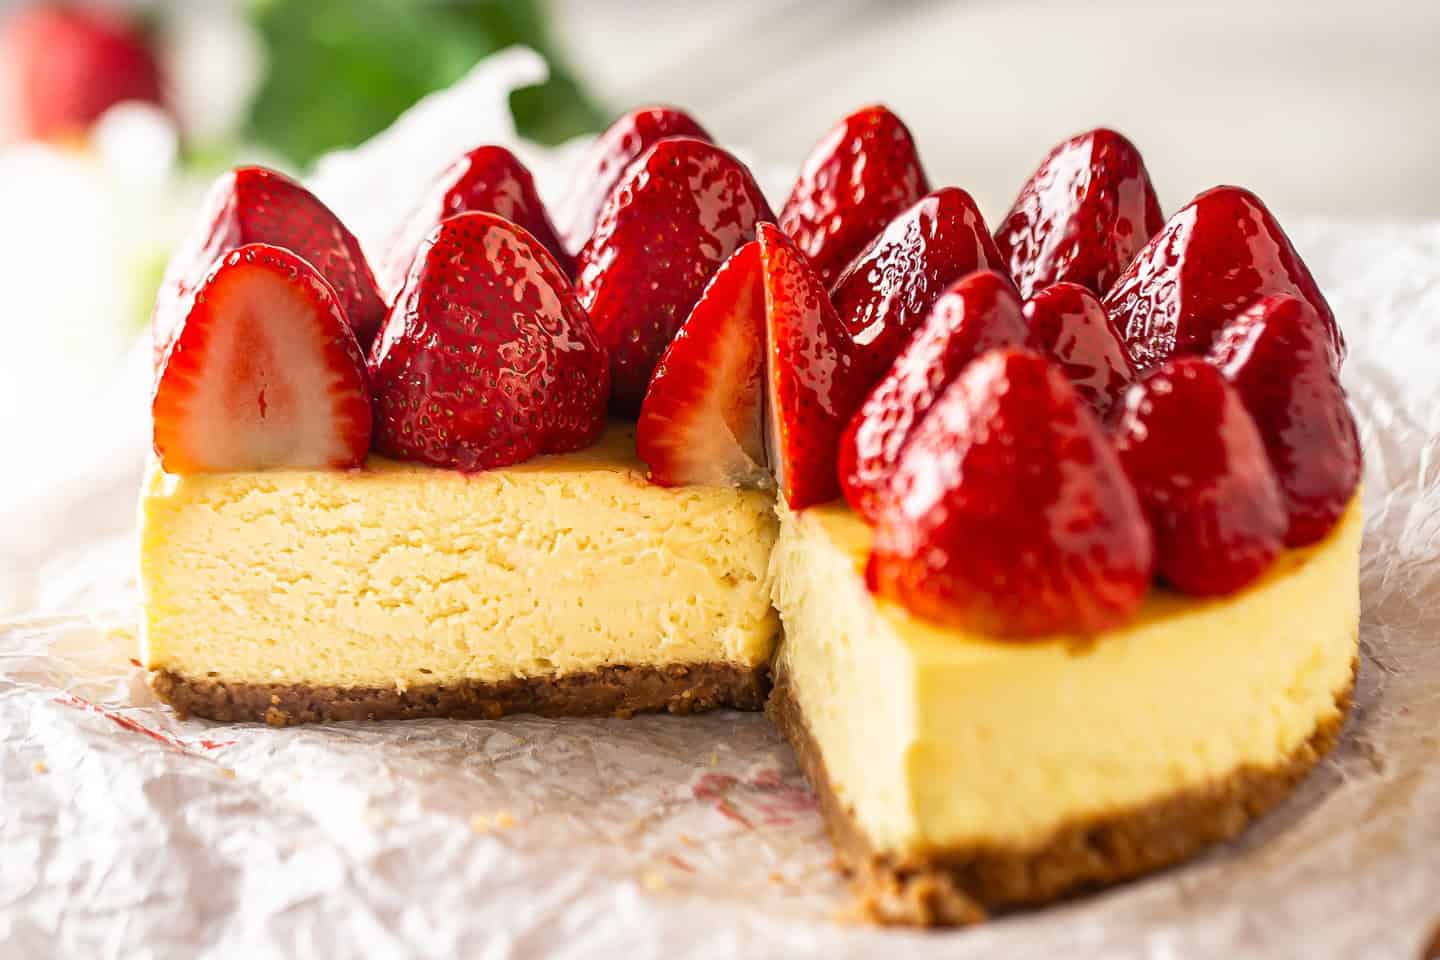 Strawberry cheesecake topping on a New York-style cheesecake with slices removed, displaying the creamy interior.